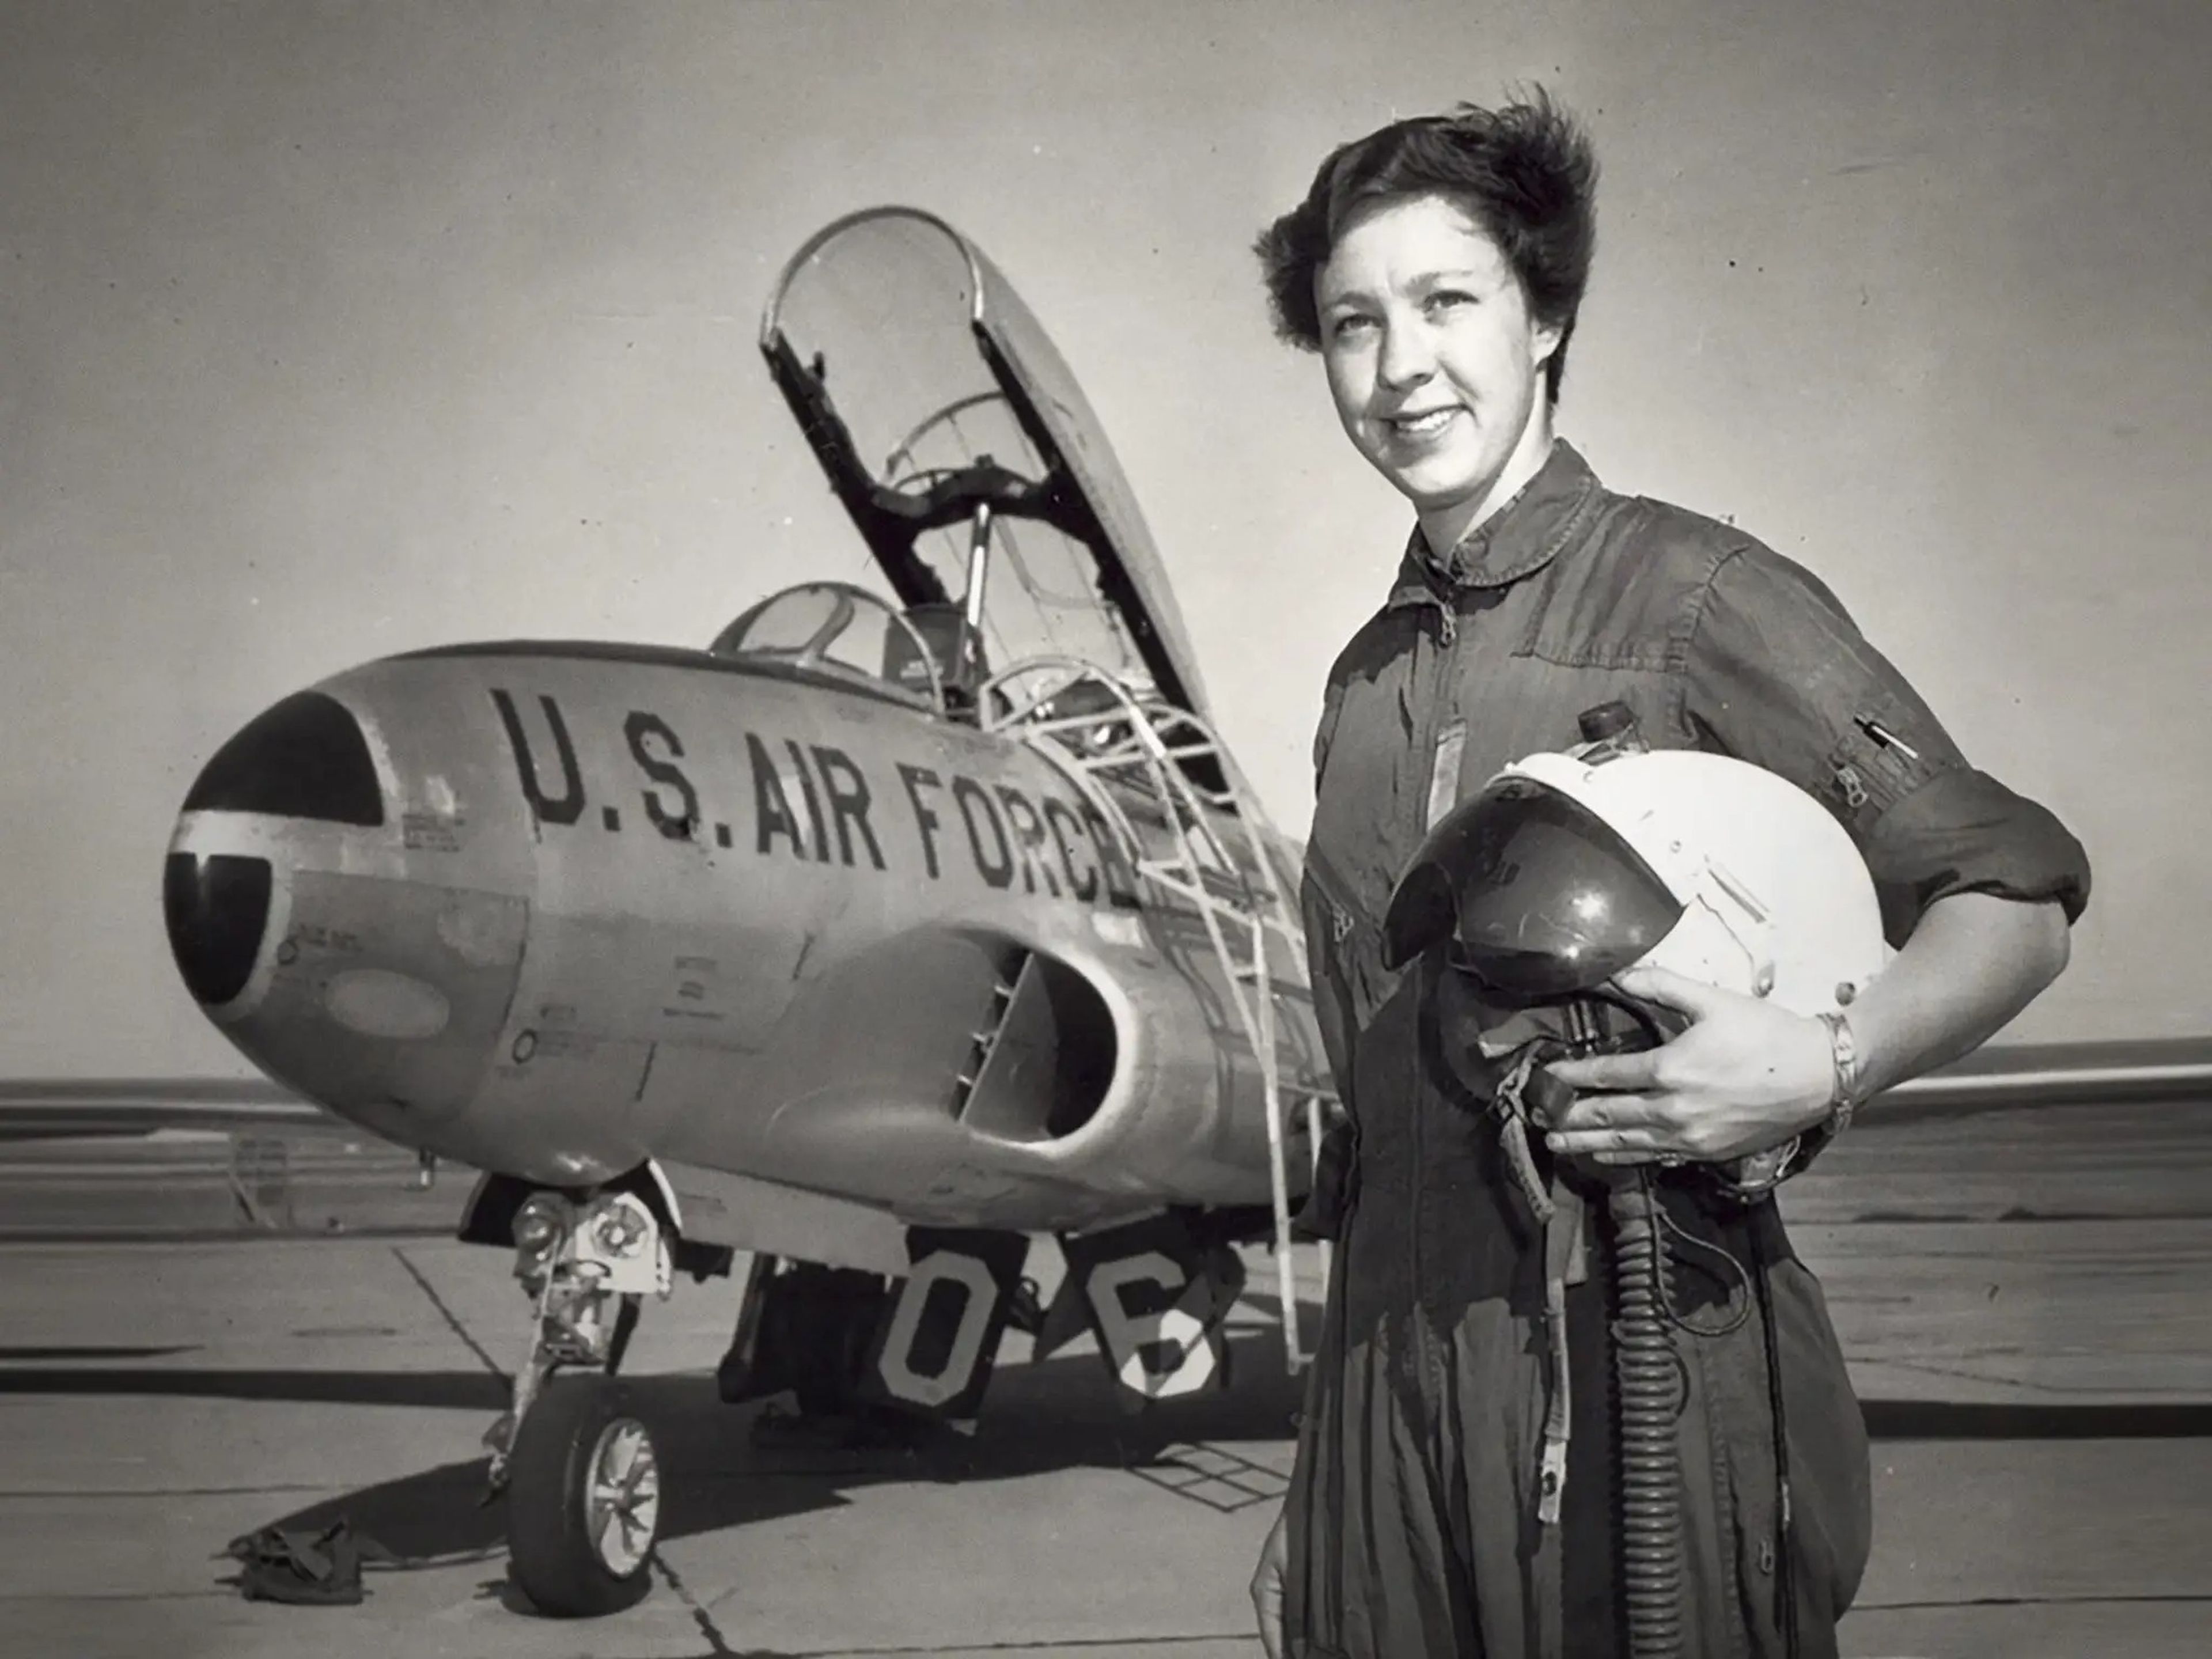 Wally Funk holds a helmet and stands by a US Air Force airplane